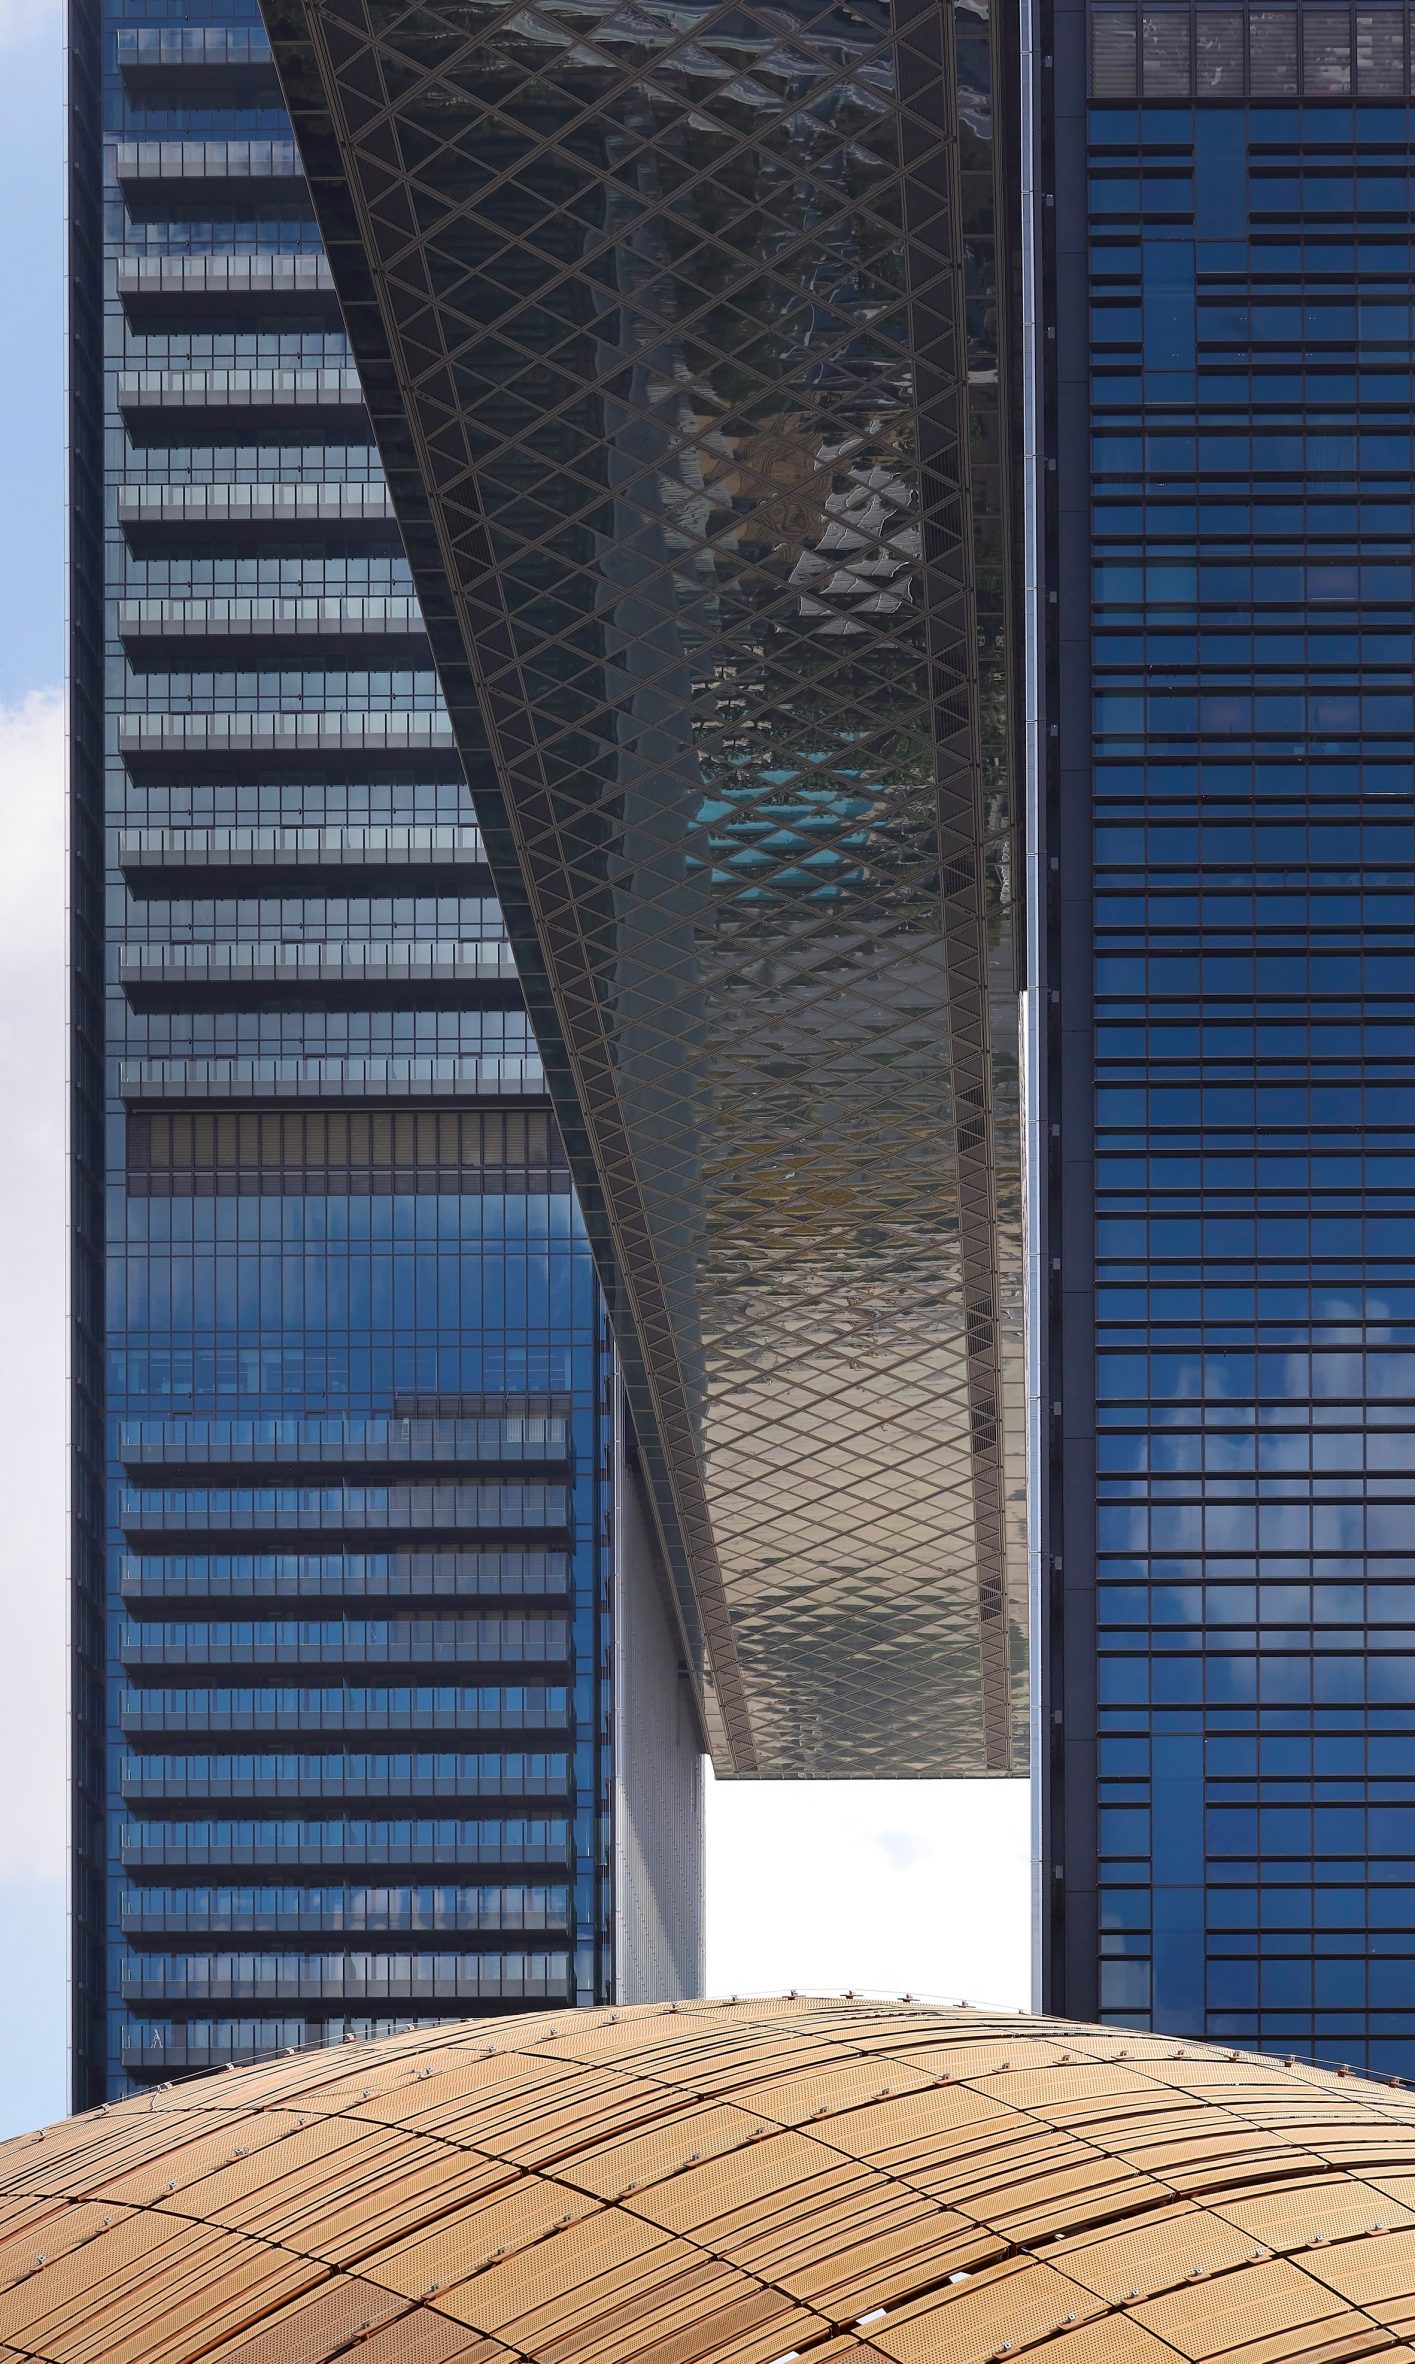 Two glass towers linked by sky bridge